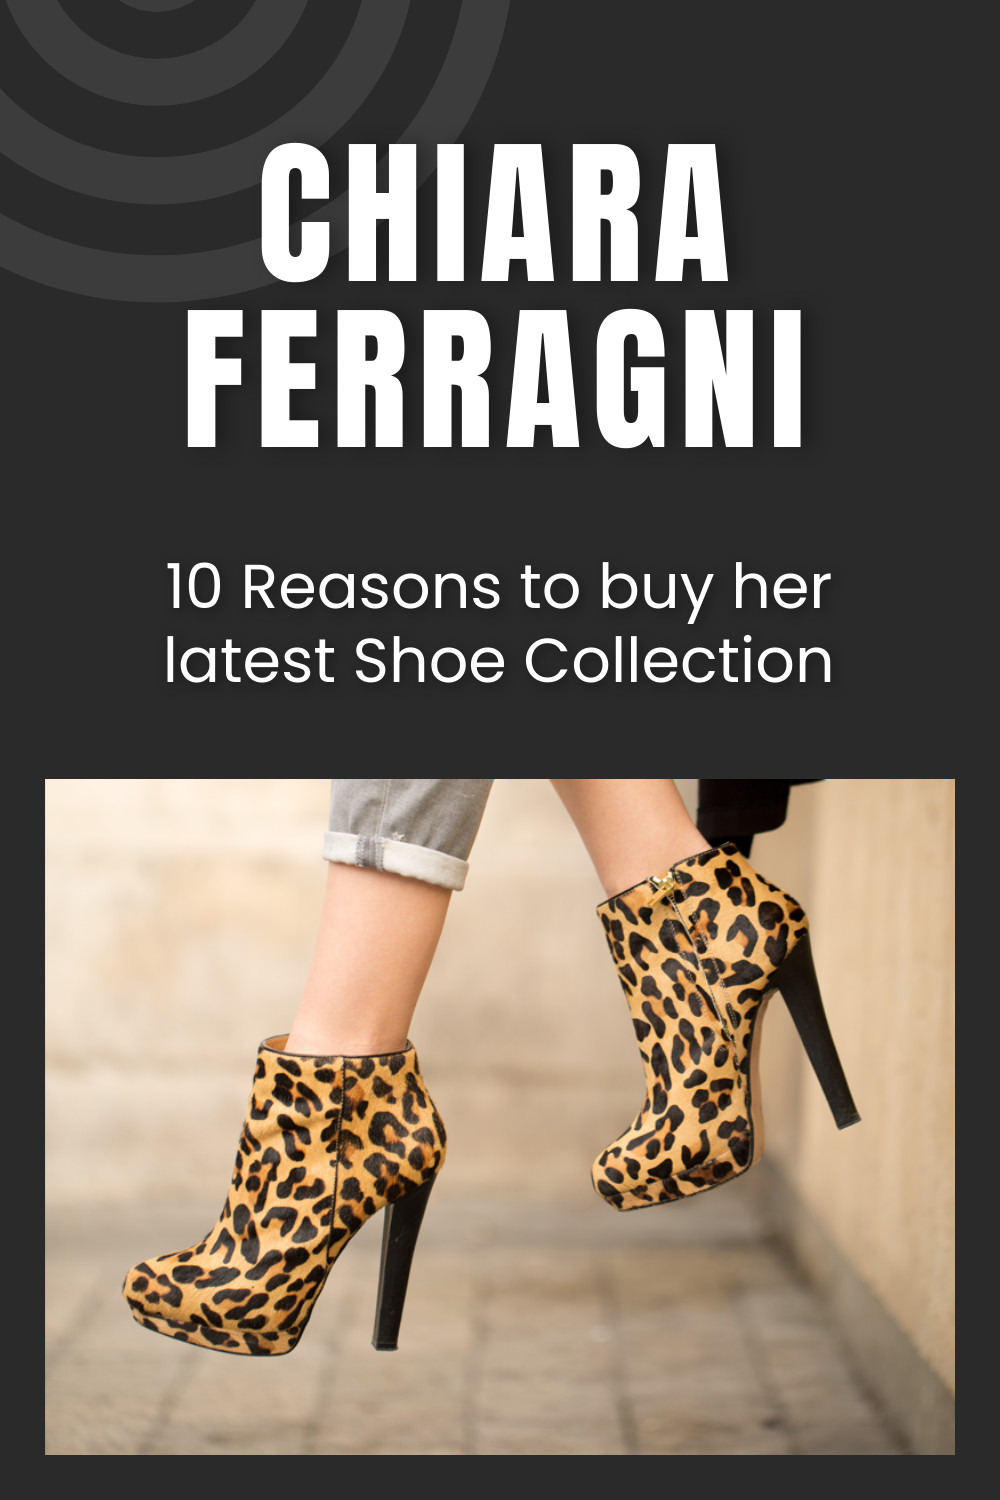 10 Reasons to Buy Female Shoes Inline Rectangle 300x250